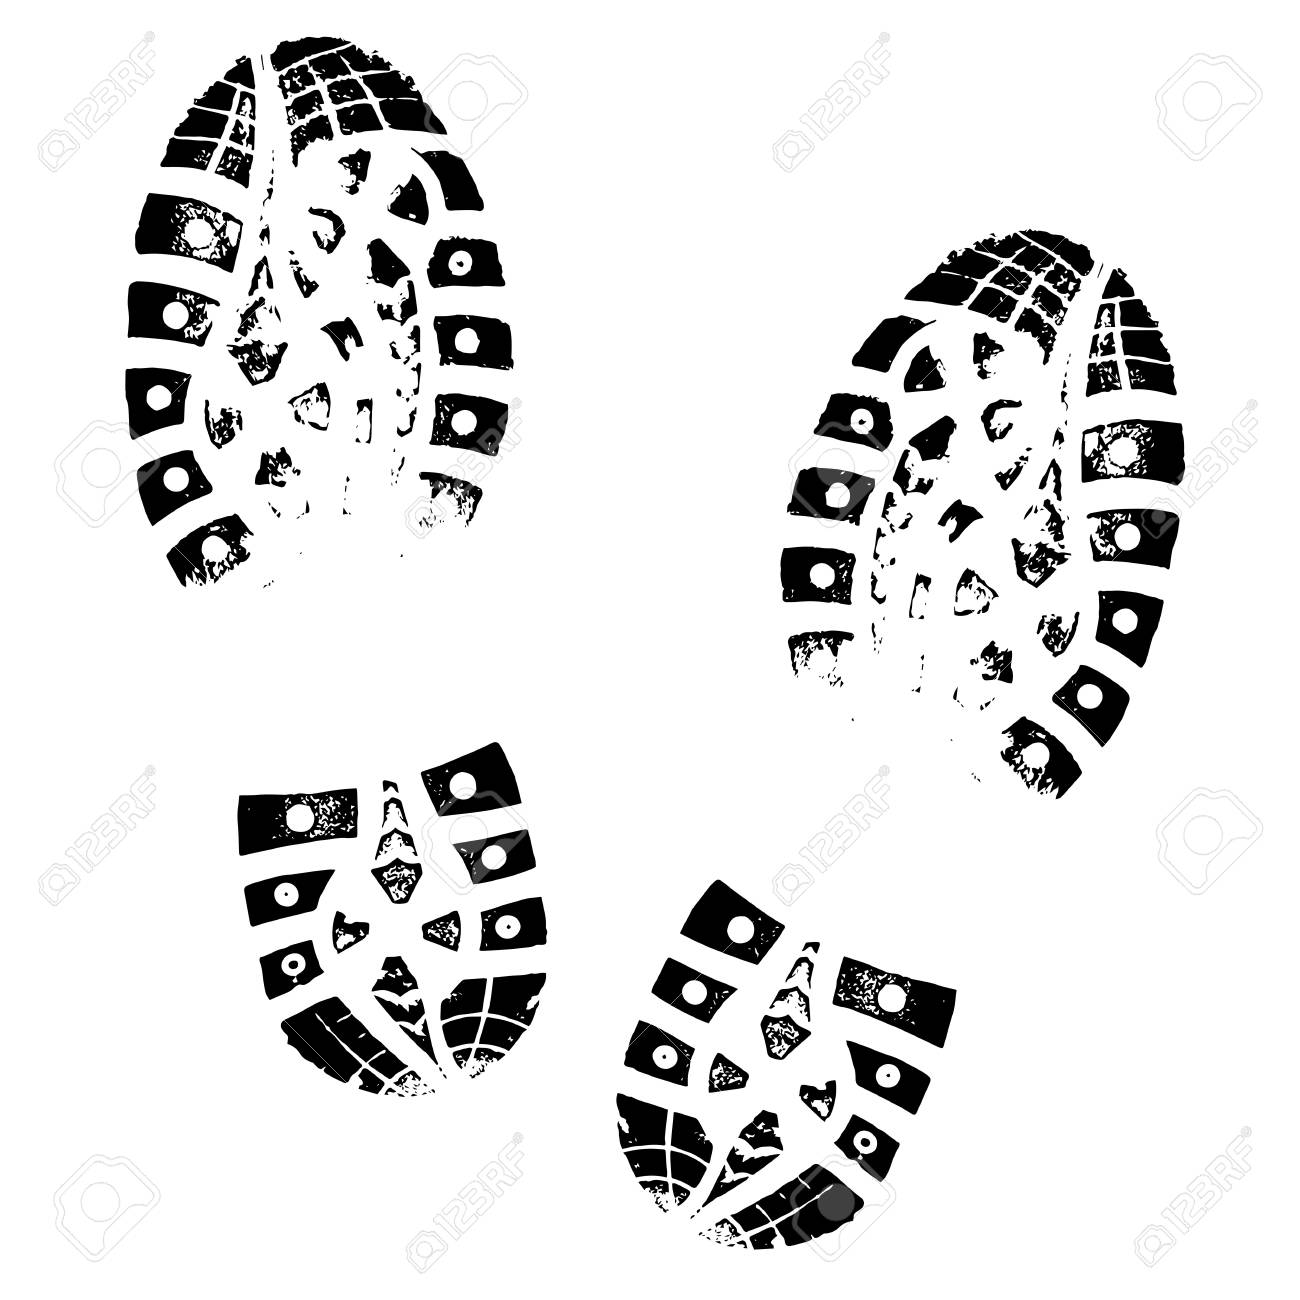 Boot Imprint Human Footprints Shoe Silhouette Isolated On White